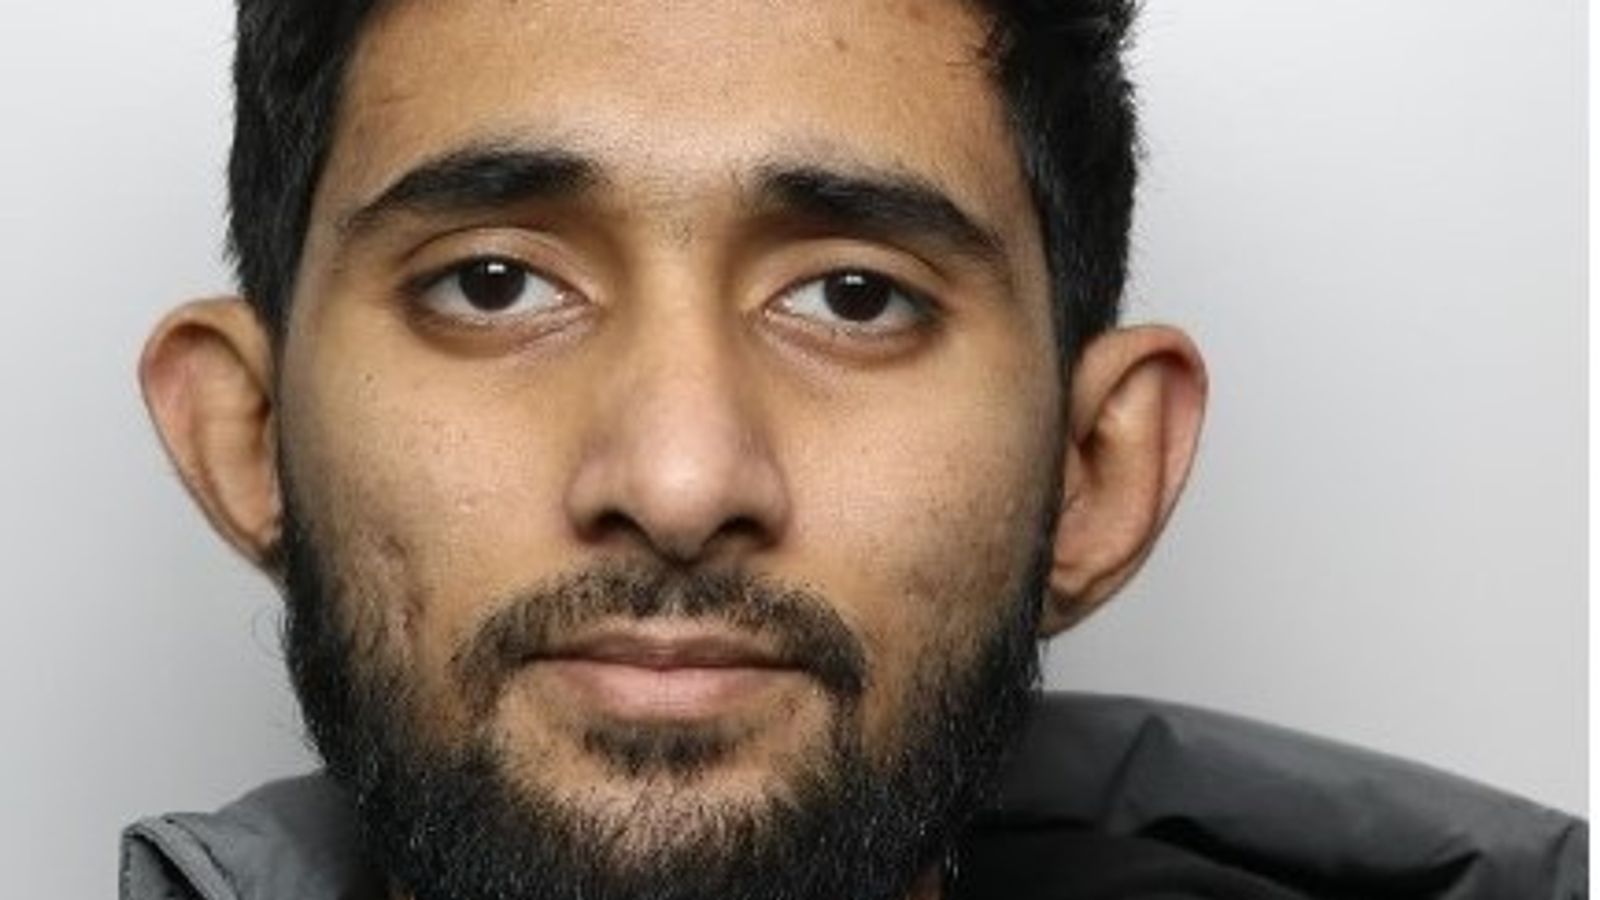 Bradford stabbing: Murder suspect was on bail for 'threats to kill' at time